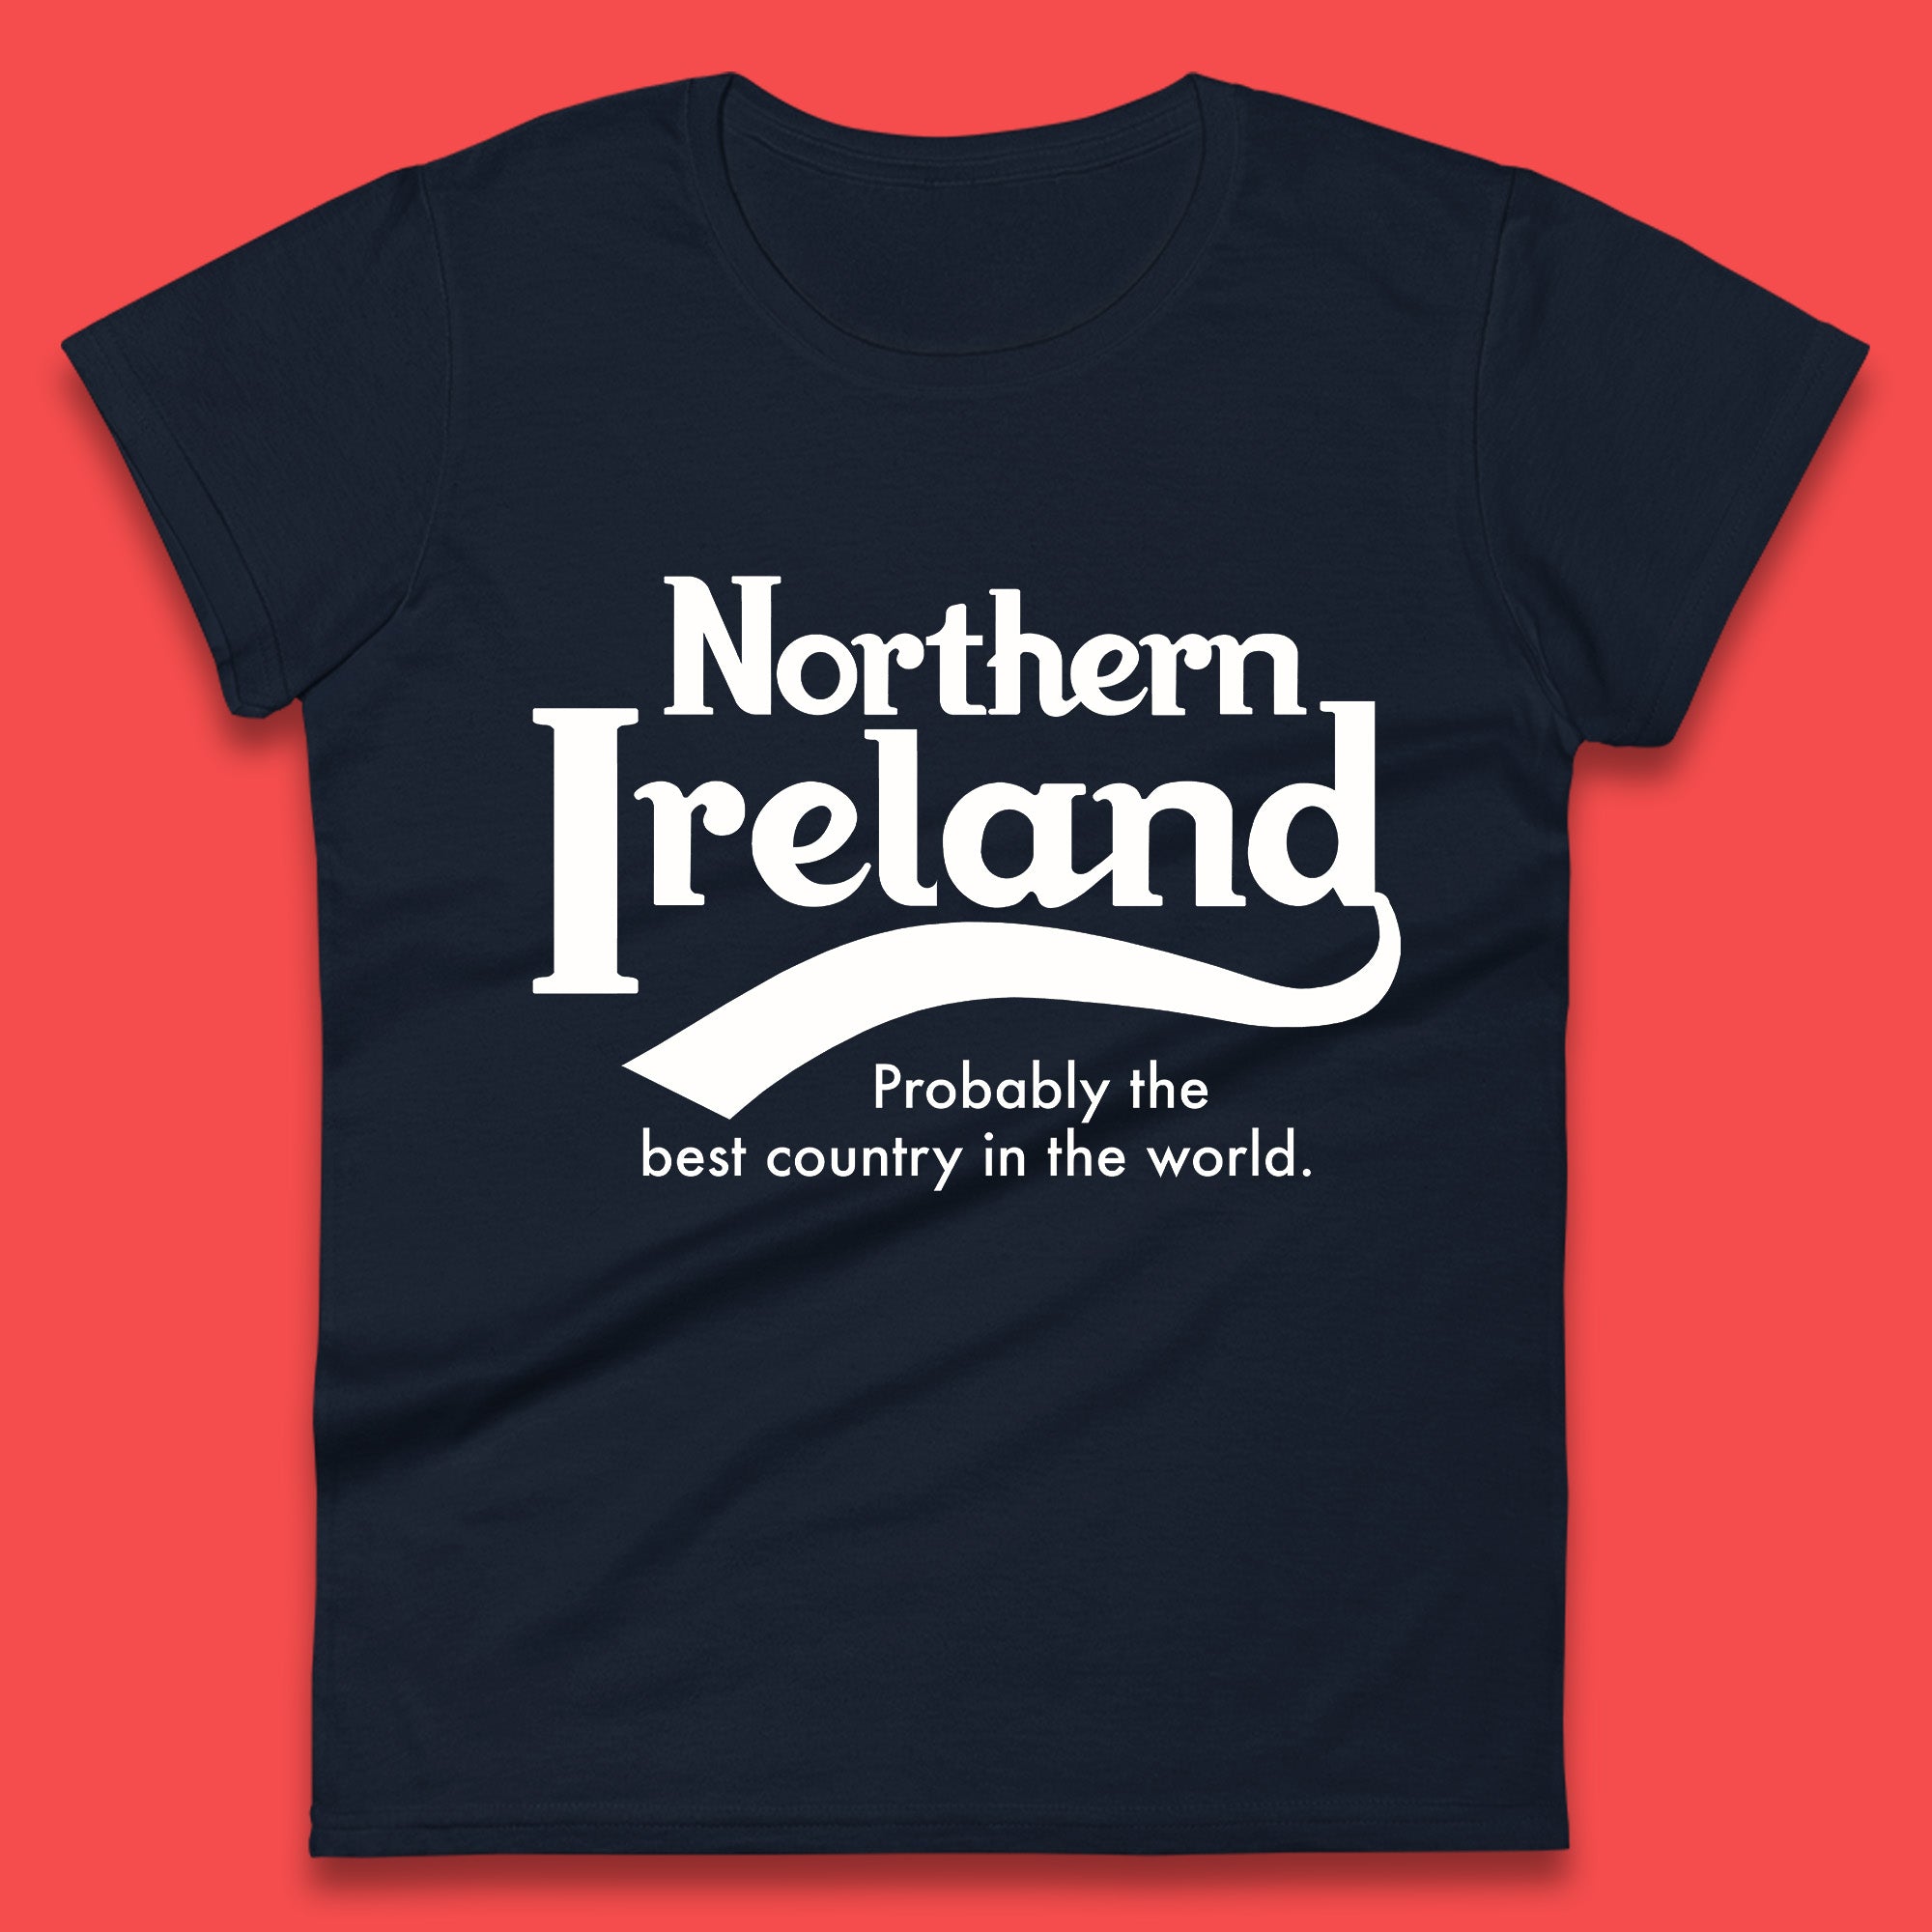 North Ireland Probably The Best Country In The World Uk Constituent Country Northern Ireland Is A Part Of The United Kingdom Womens Tee Top